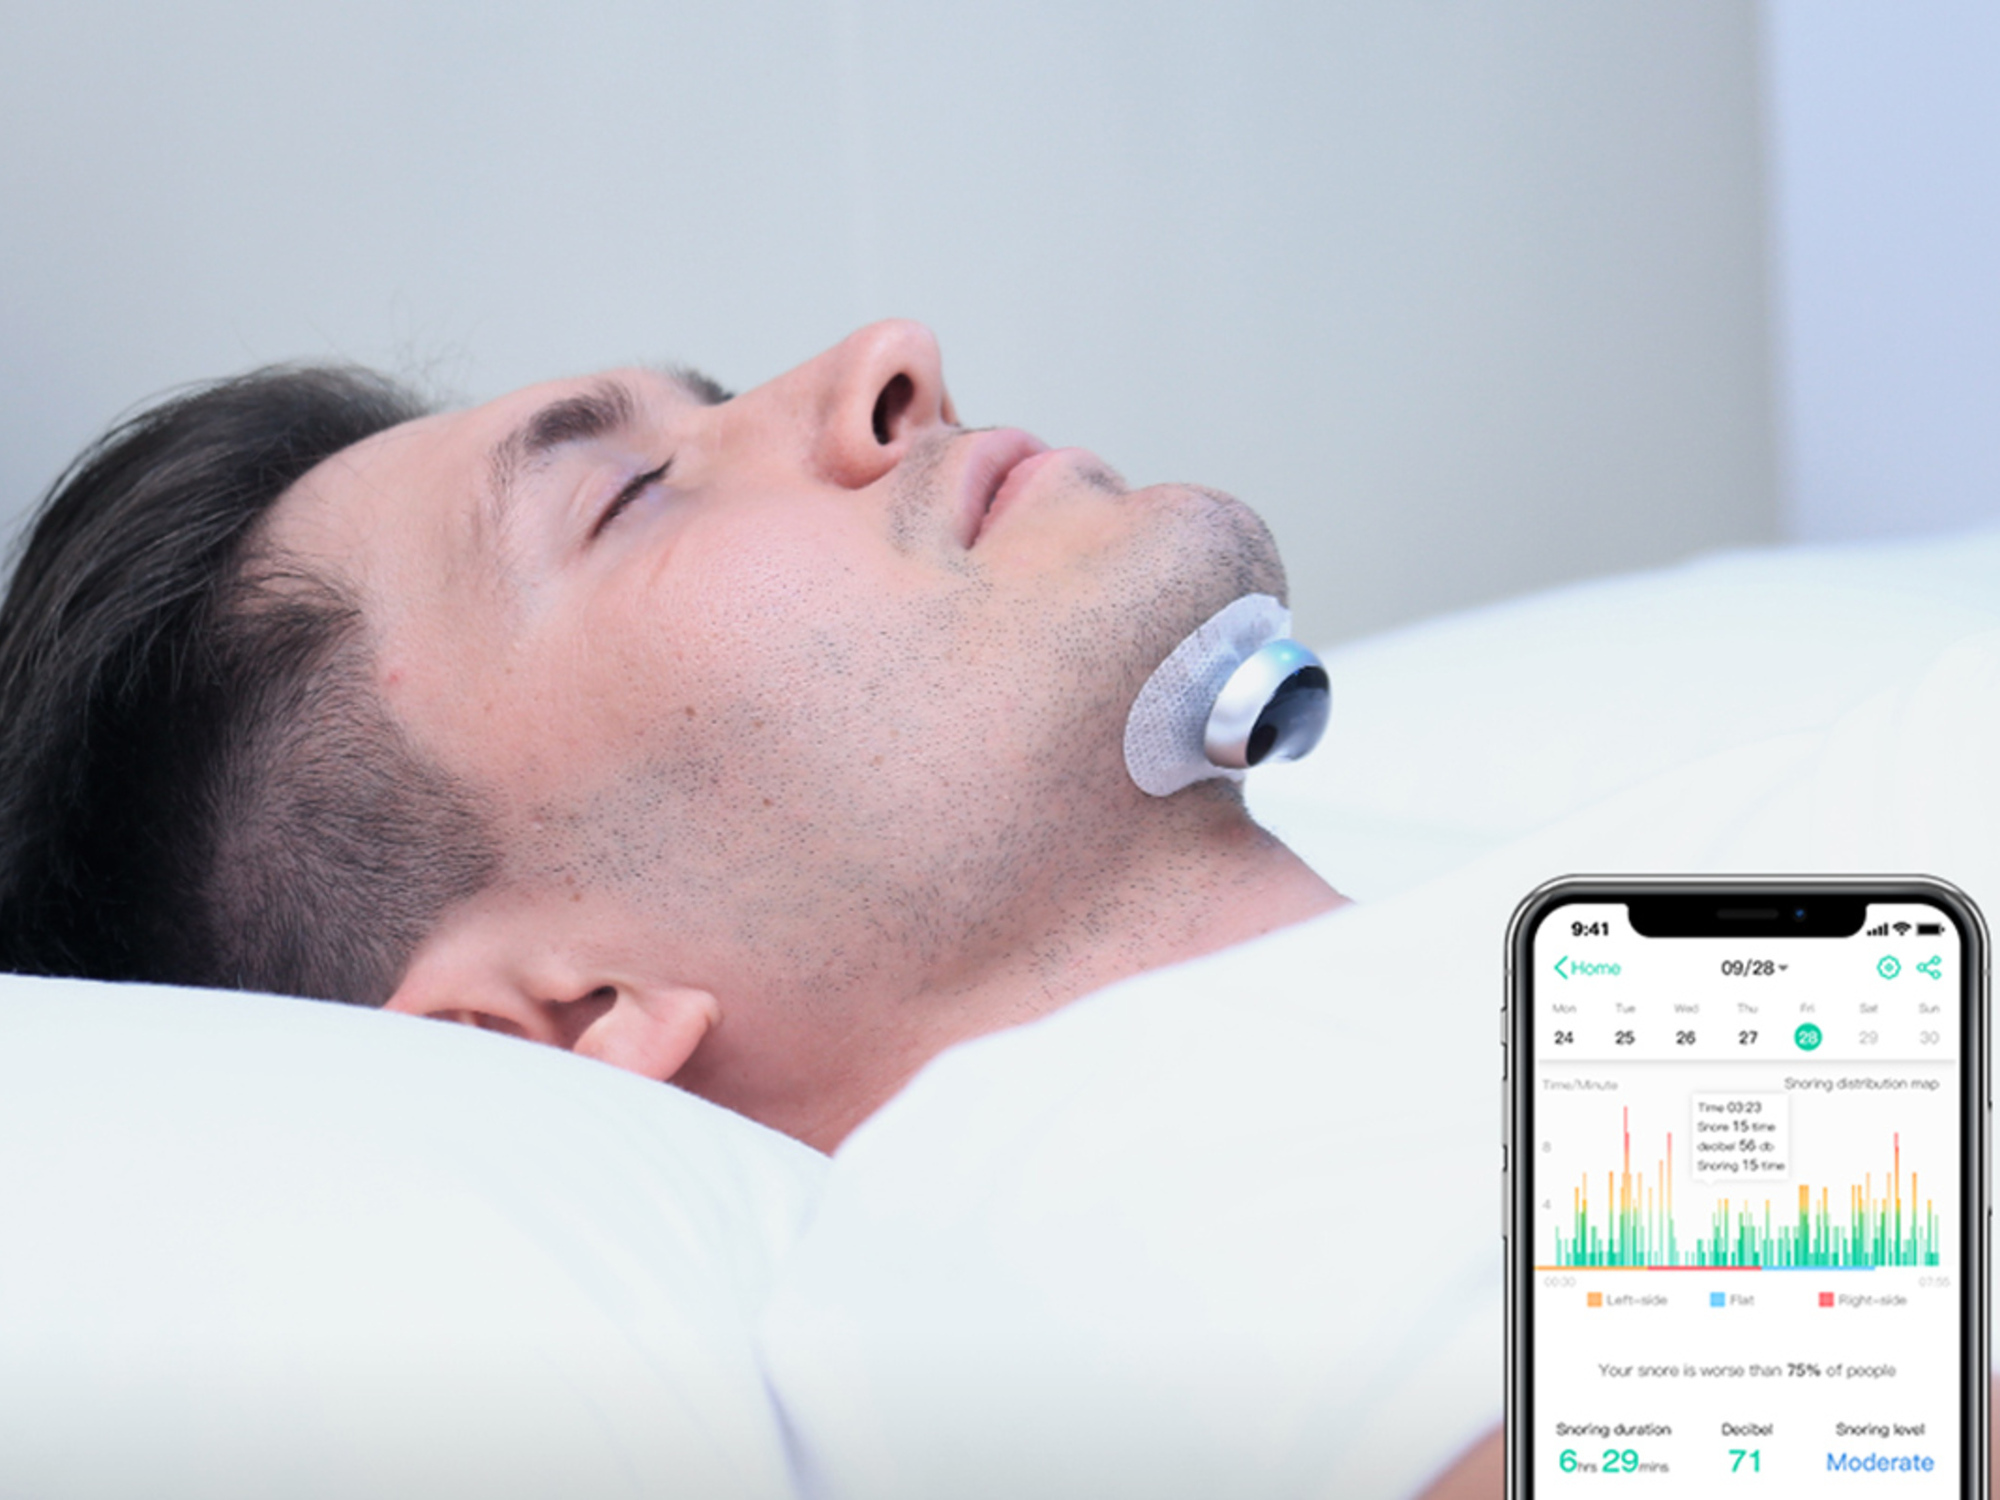 Grab this anti-snoring device at its best web pricing yet